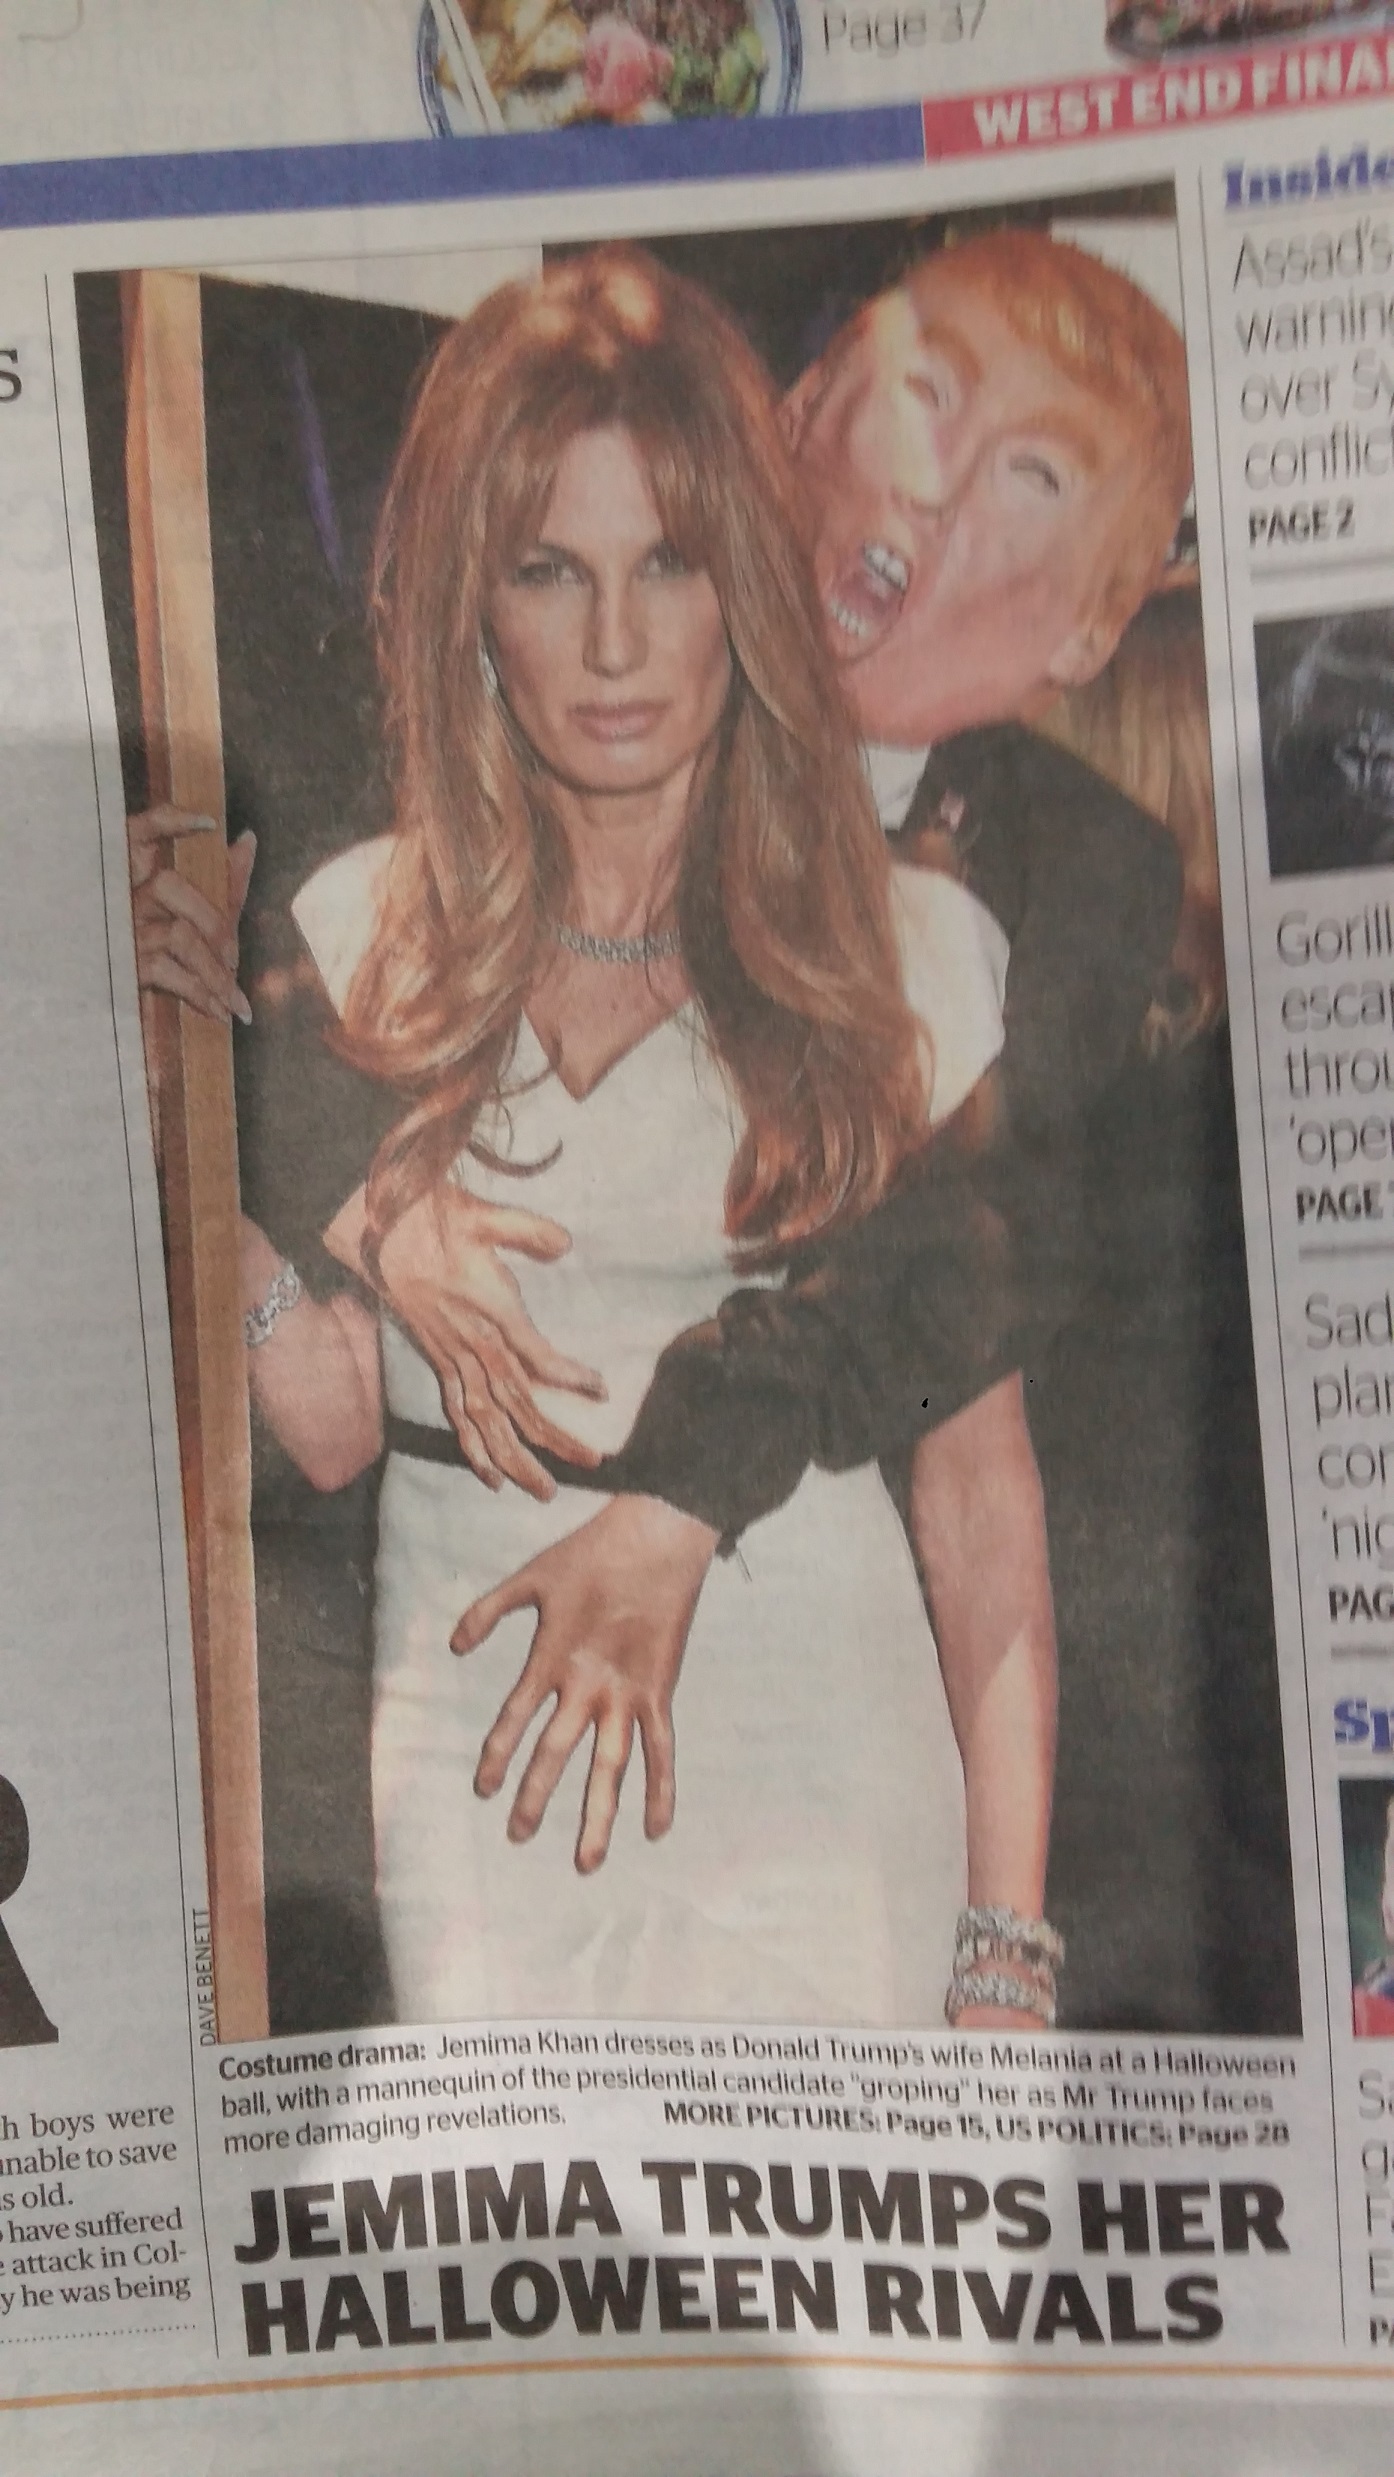 London socialite Jemima Khan goes to a Hallowe'en party dressed as a woman being groped by Donald Trump.